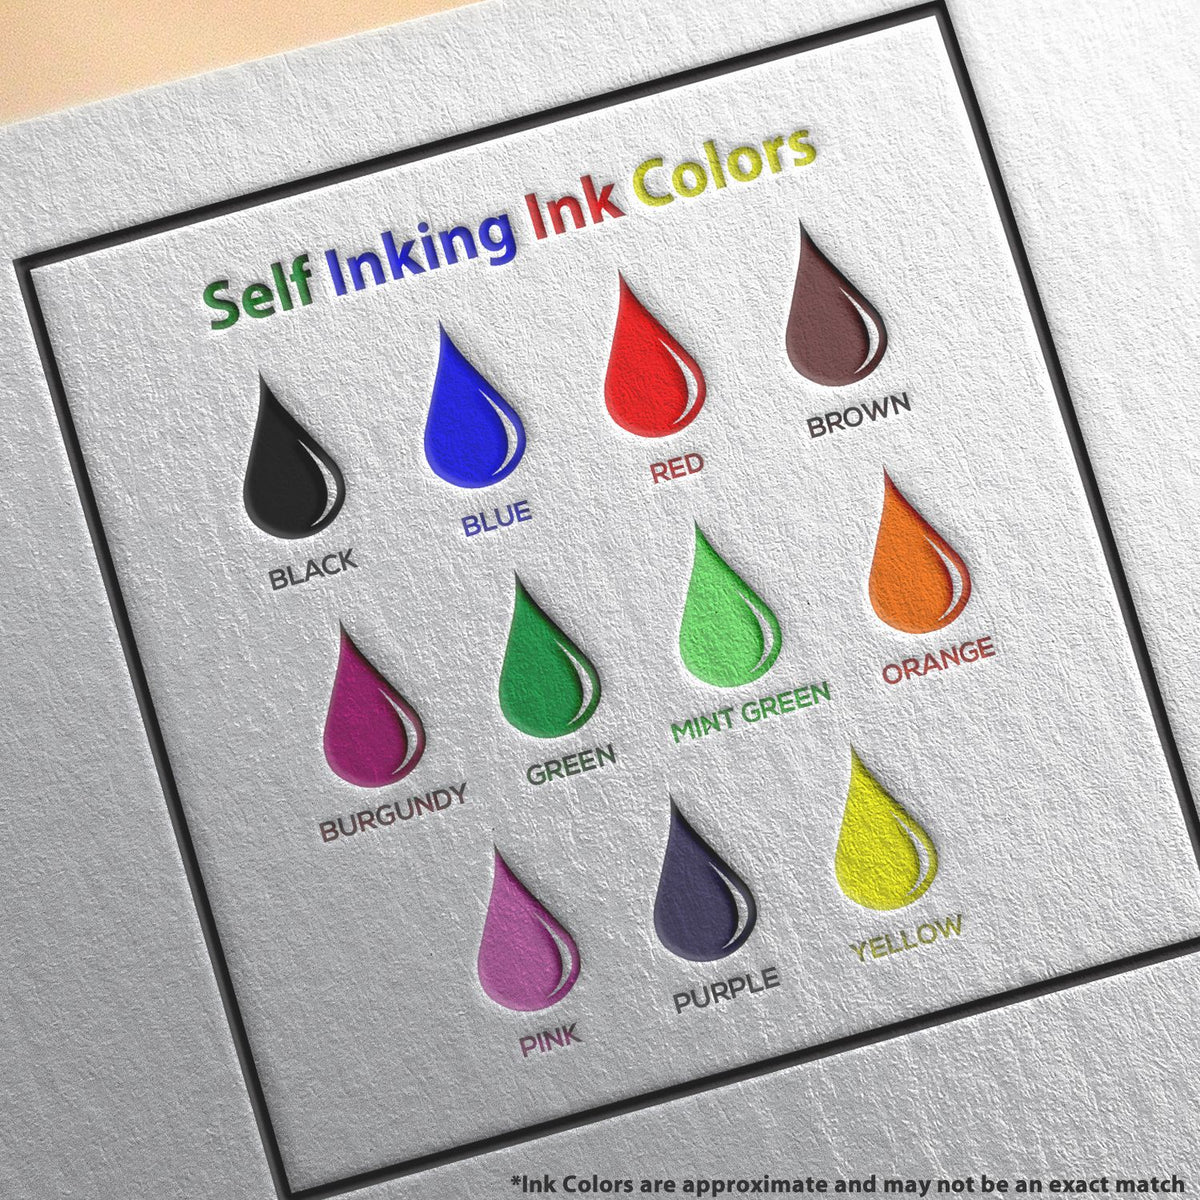 A picture showing the different ink colors or hues available for the Self-Inking North Dakota Landscape Architect Stamp product.